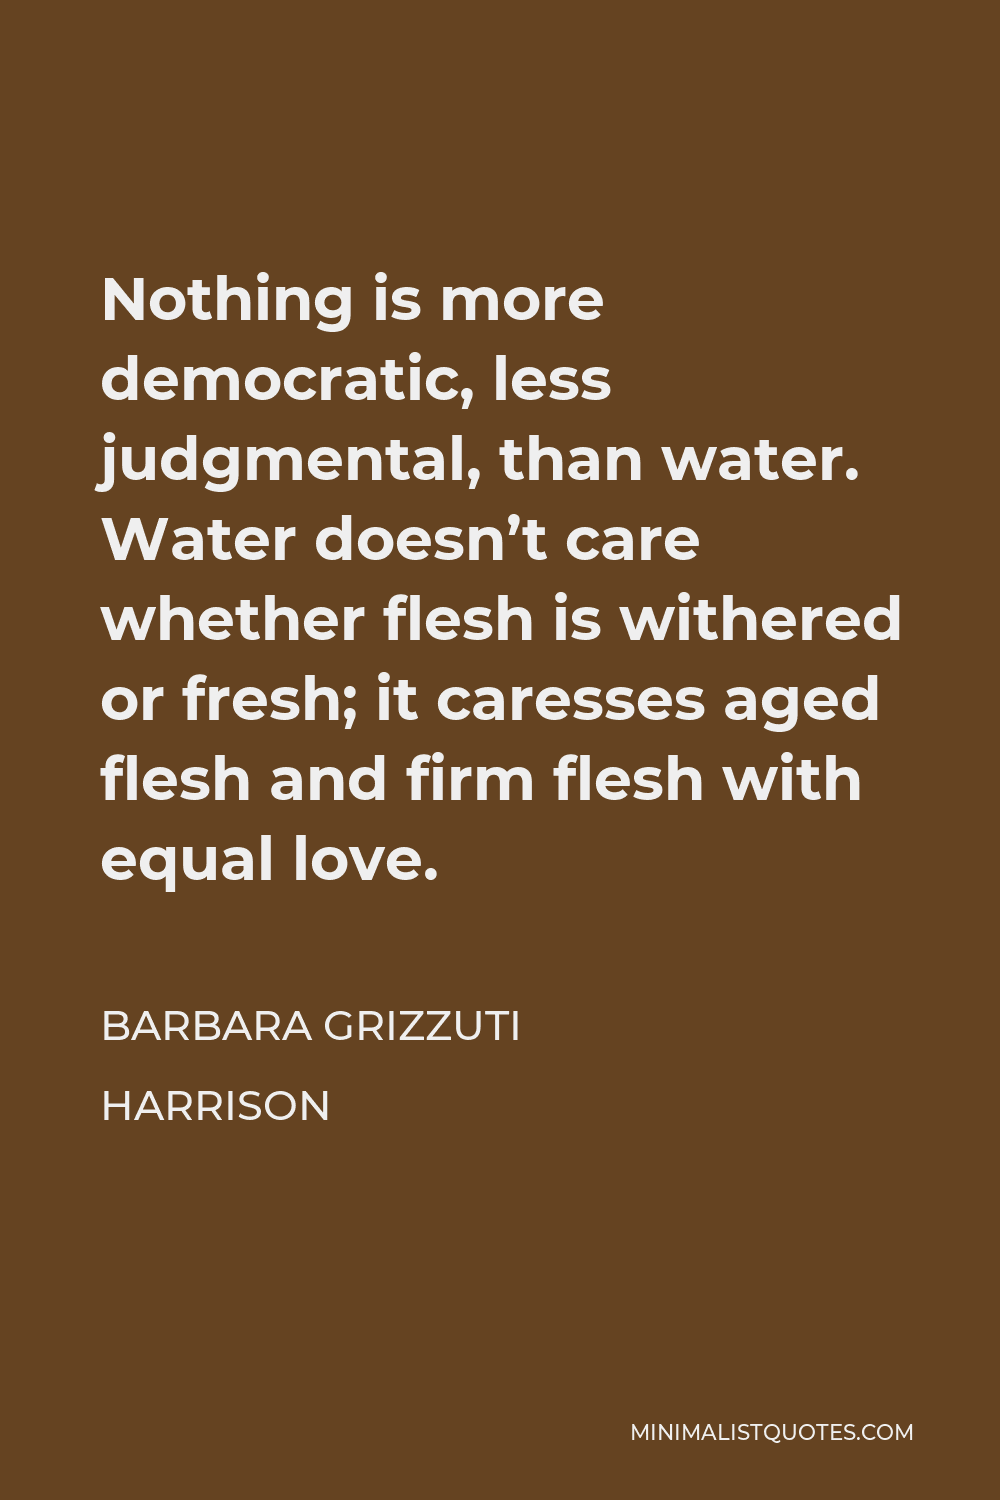 Barbara Grizzuti Harrison Quote - Nothing is more democratic, less judgmental, than water. Water doesn’t care whether flesh is withered or fresh; it caresses aged flesh and firm flesh with equal love.